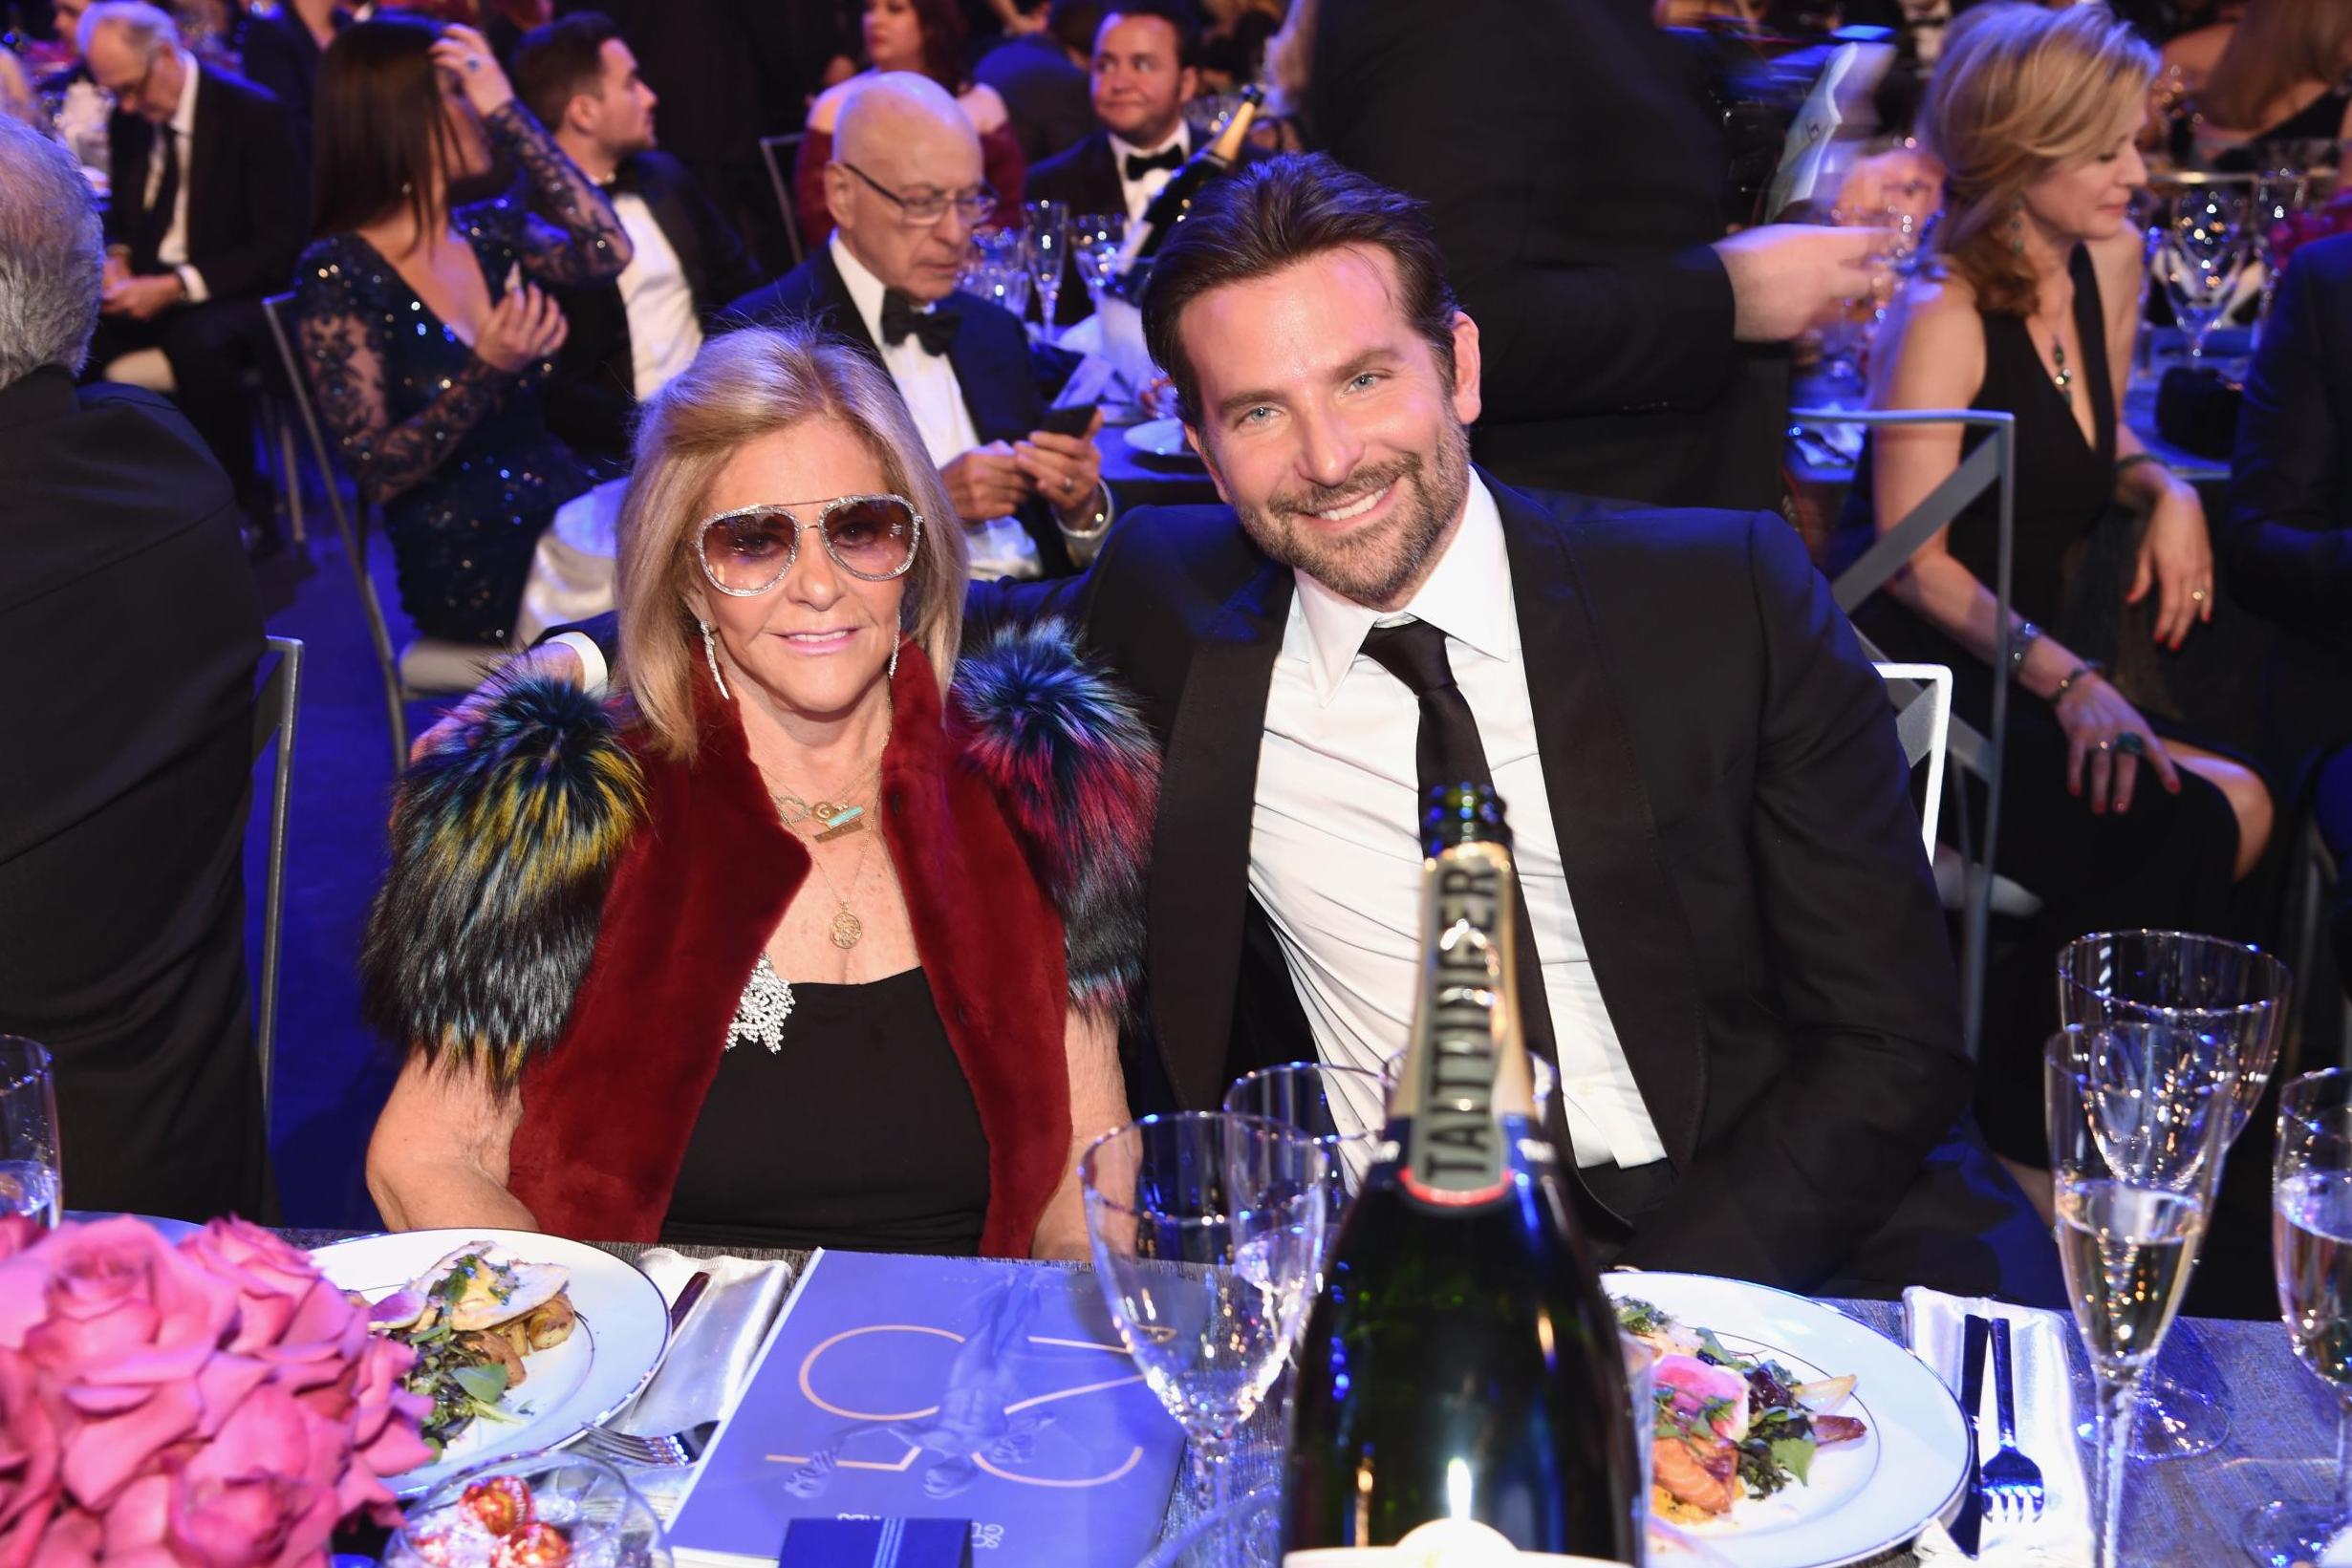 Bradley Cooper and his mother Gloria Campano at the SAG Awards on 27 January 2019 in Los Angeles, California.